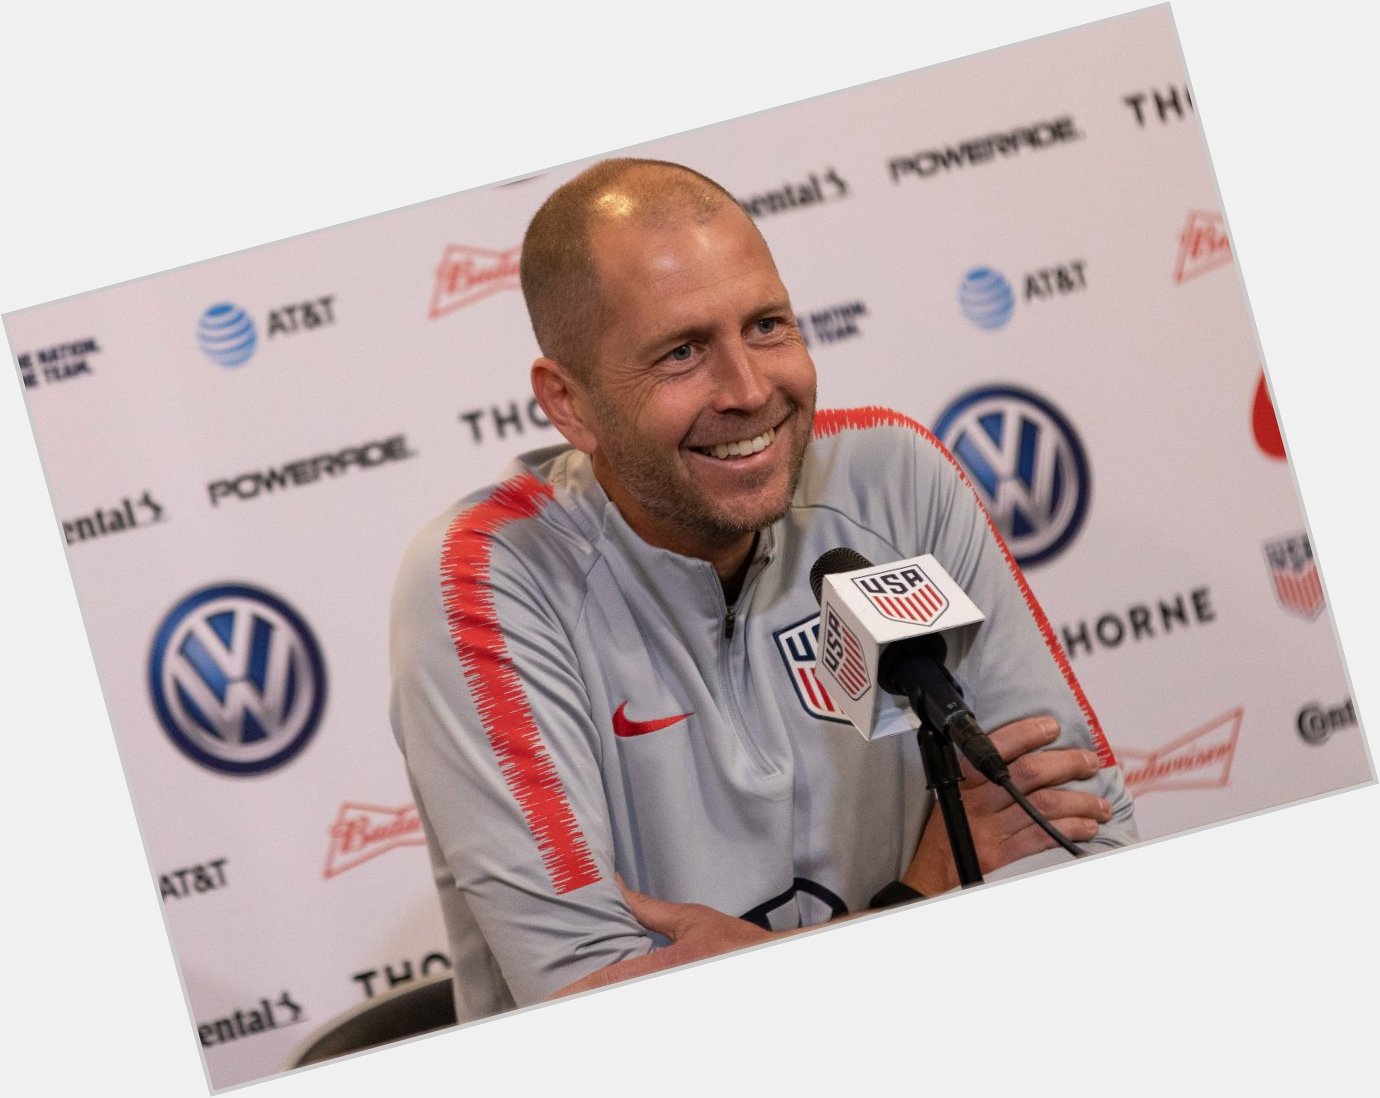 Wishing a happy birthday to        head coach and        defender Gregg Berhalter! 